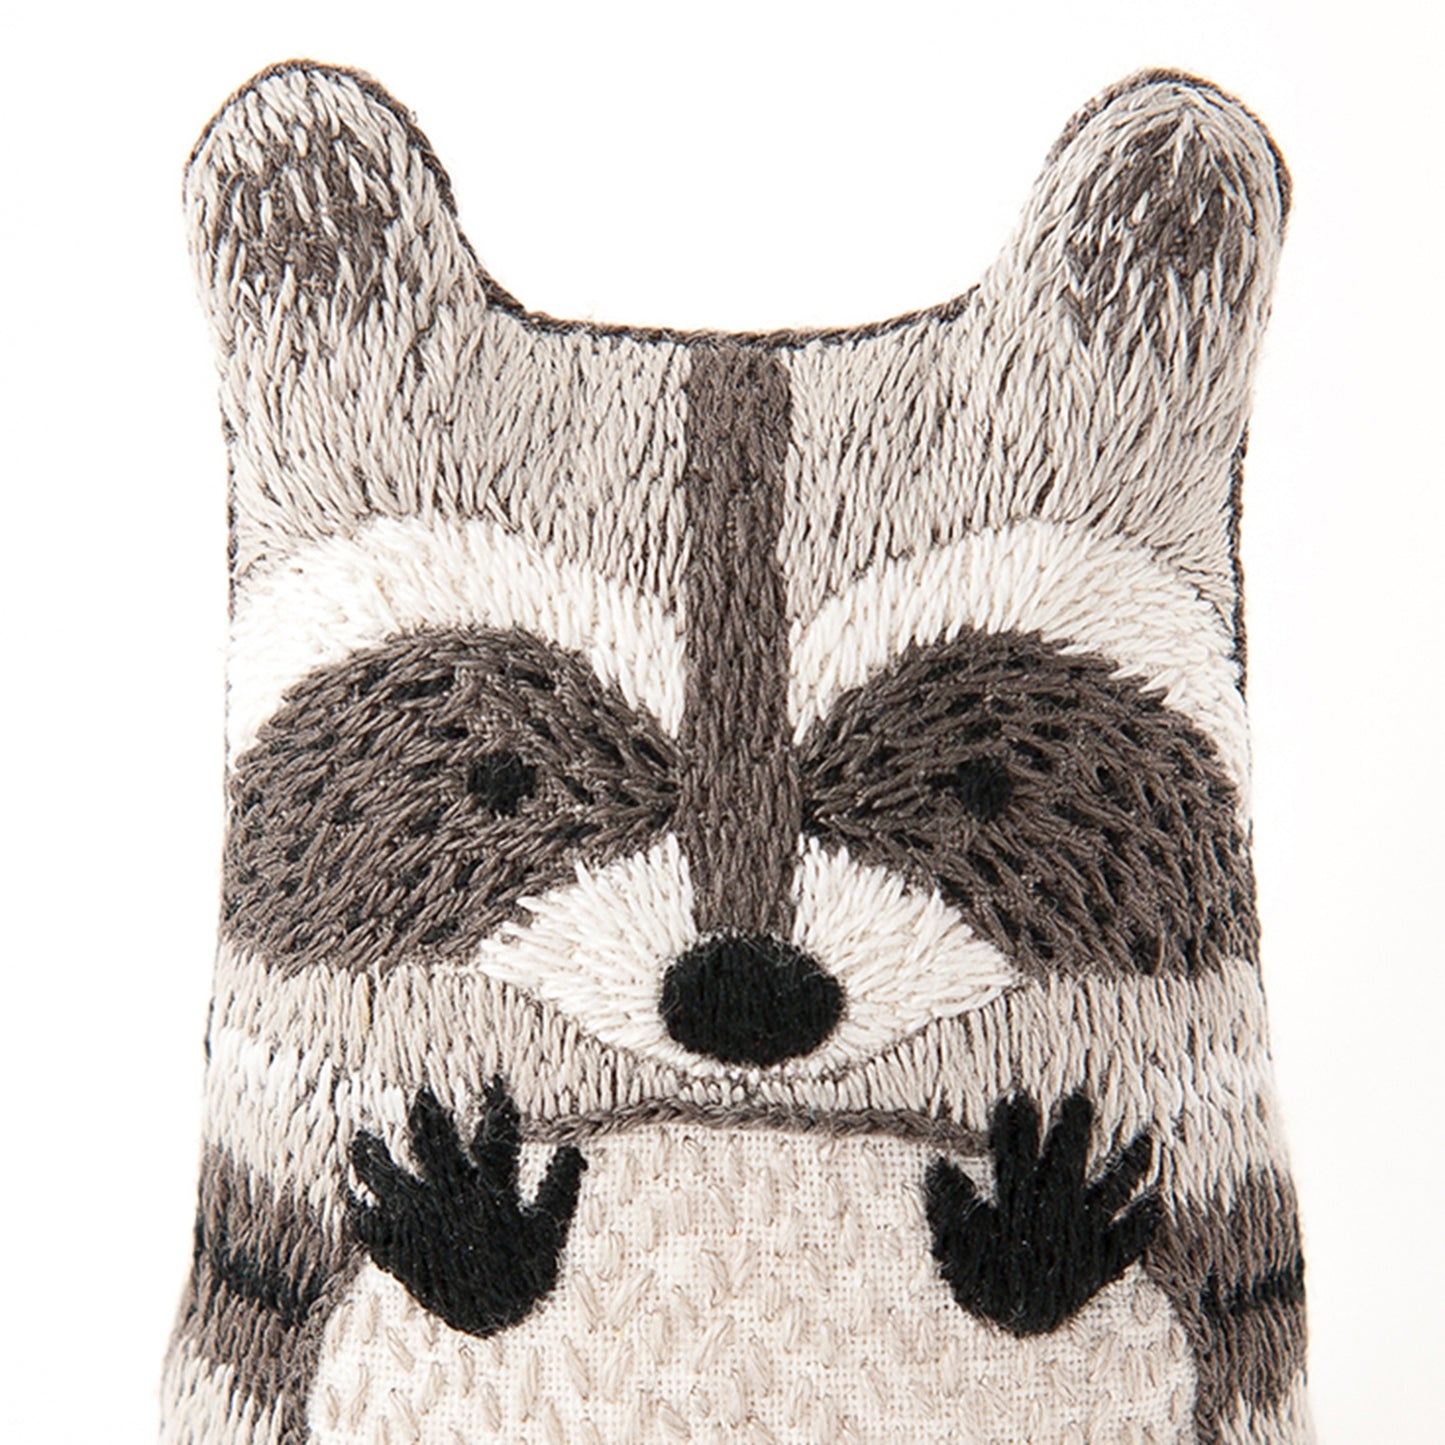 D.I.Y. Embroidered Doll Kit - Raccoon Alternative View #1